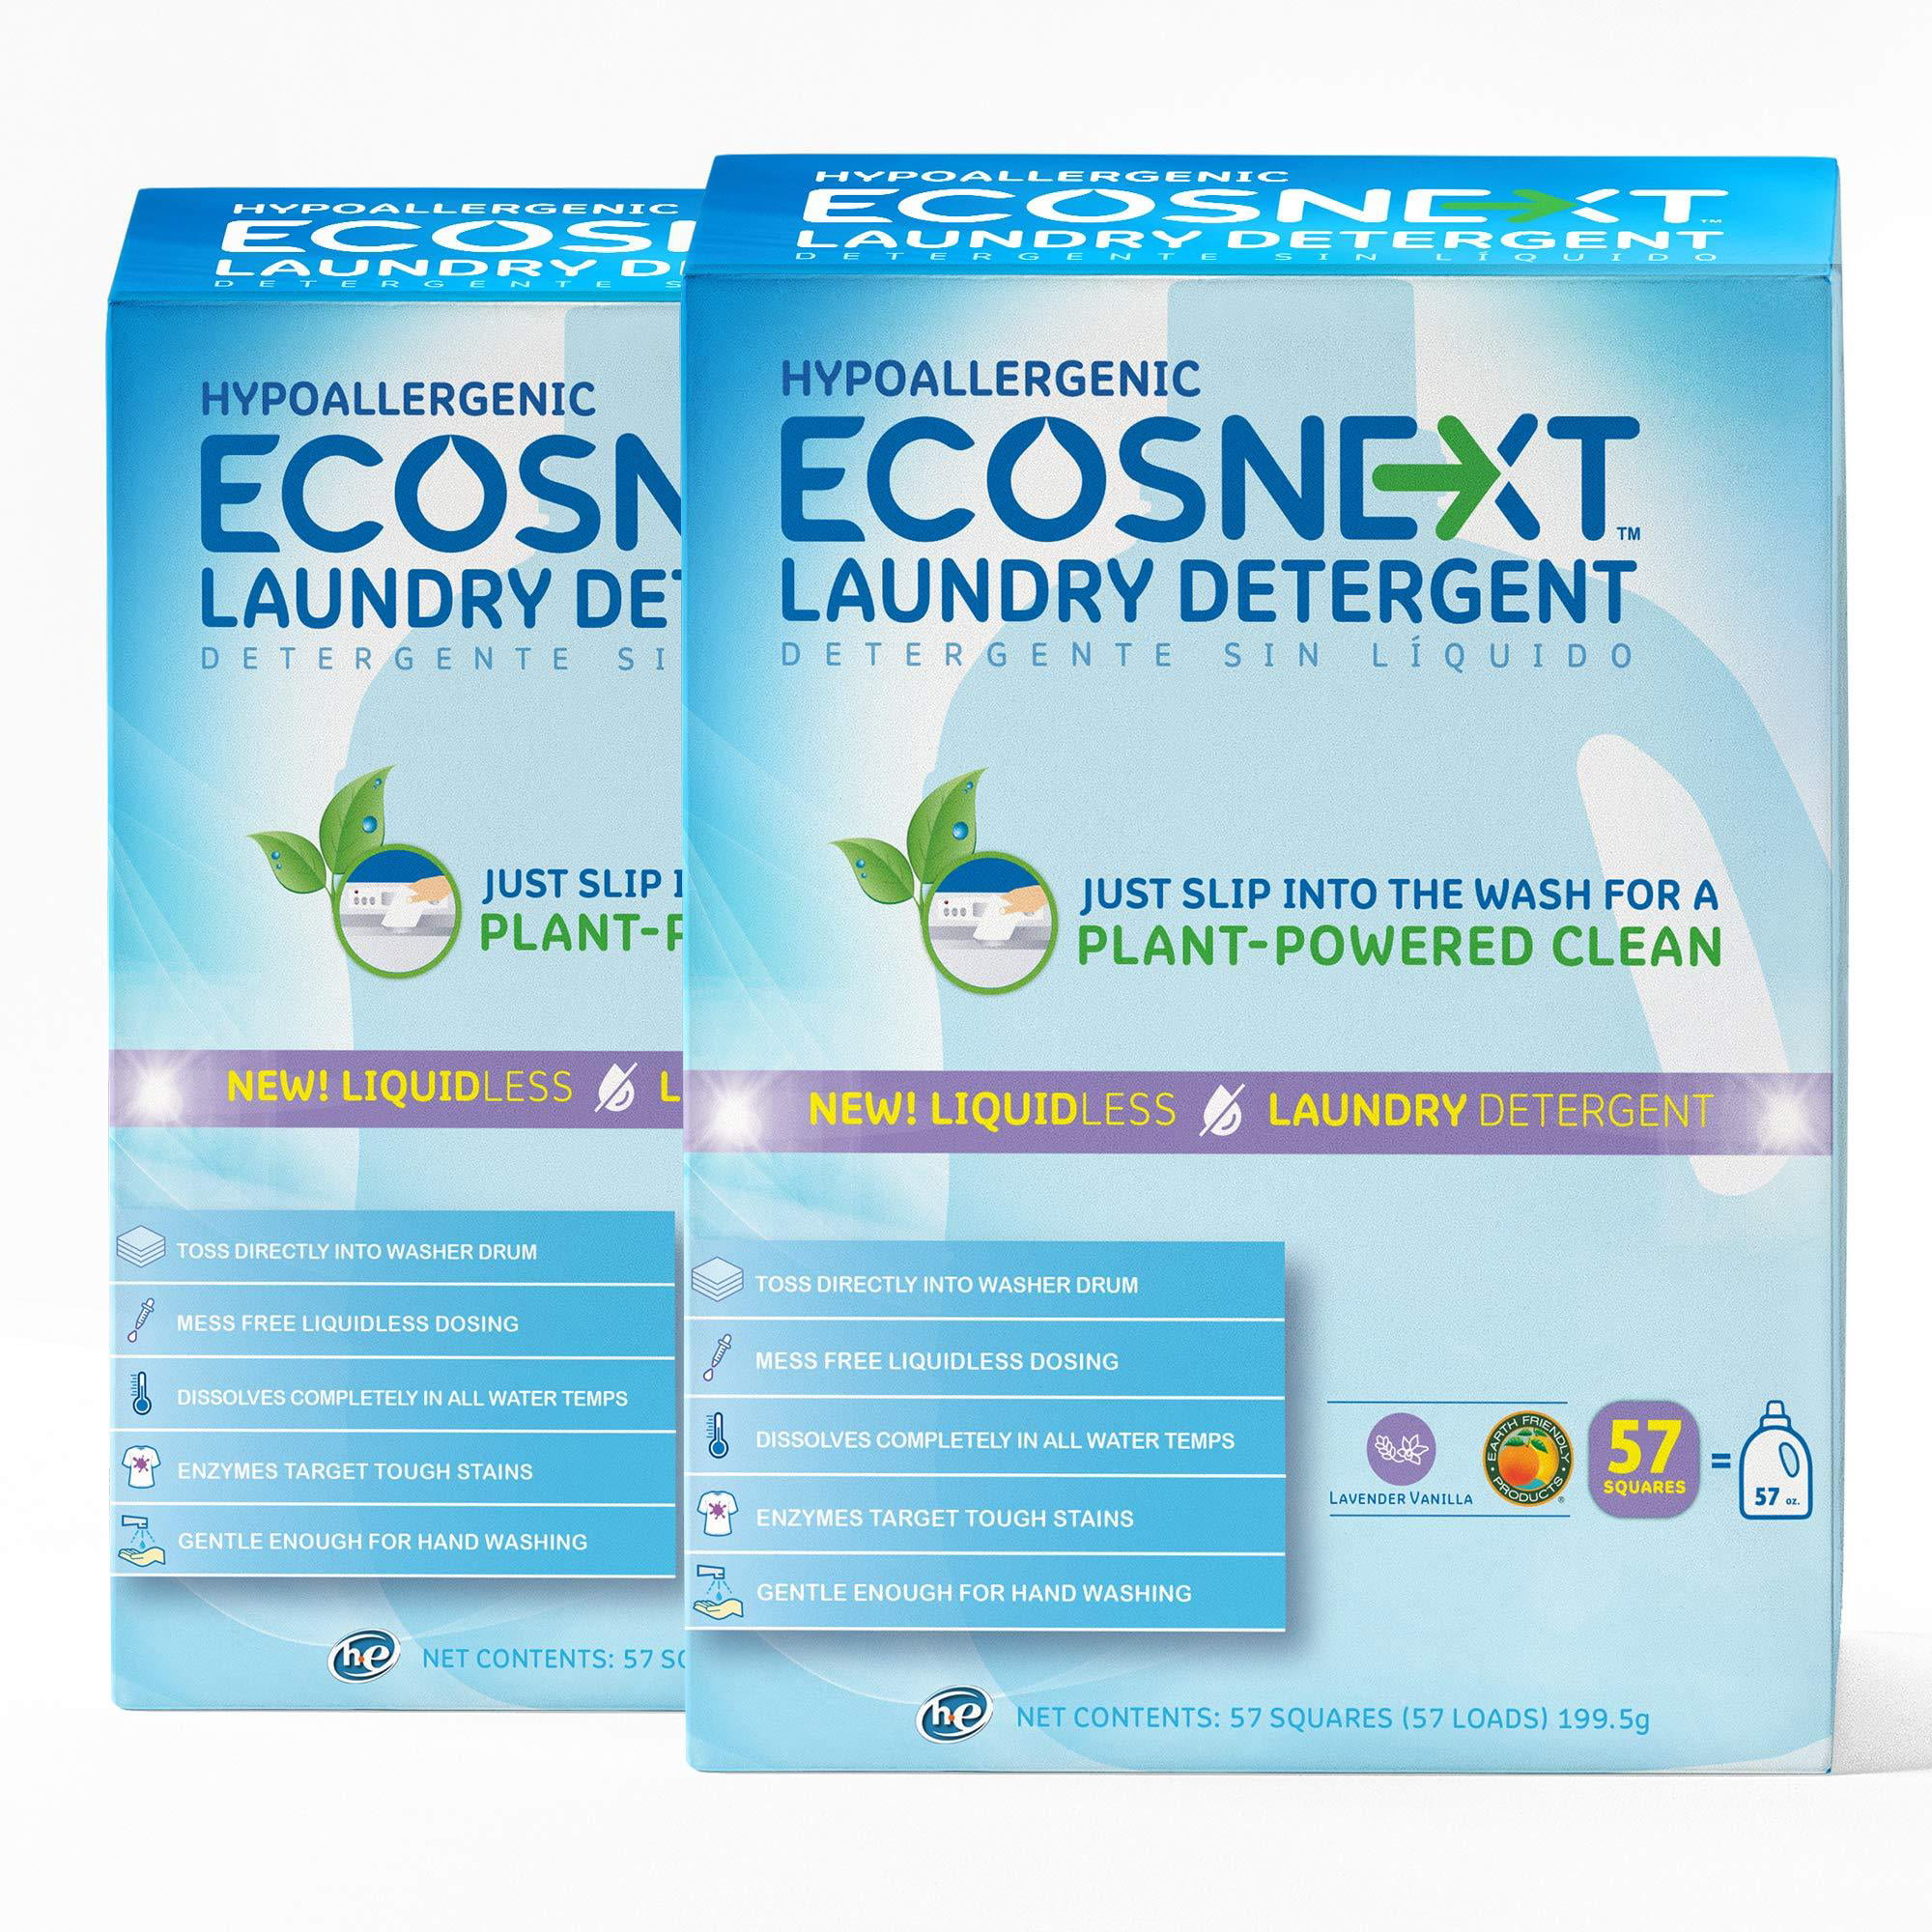 of - Washer Detergent Liquid Laundry Vegan, 2) & ECOS Mess Count Hypoallergenic, Lavender in Laundry Jug, Detergent Laundry Plastic Powered Sheets (Pack Free No Vanilla - Sheets 57 Sheets No Plant